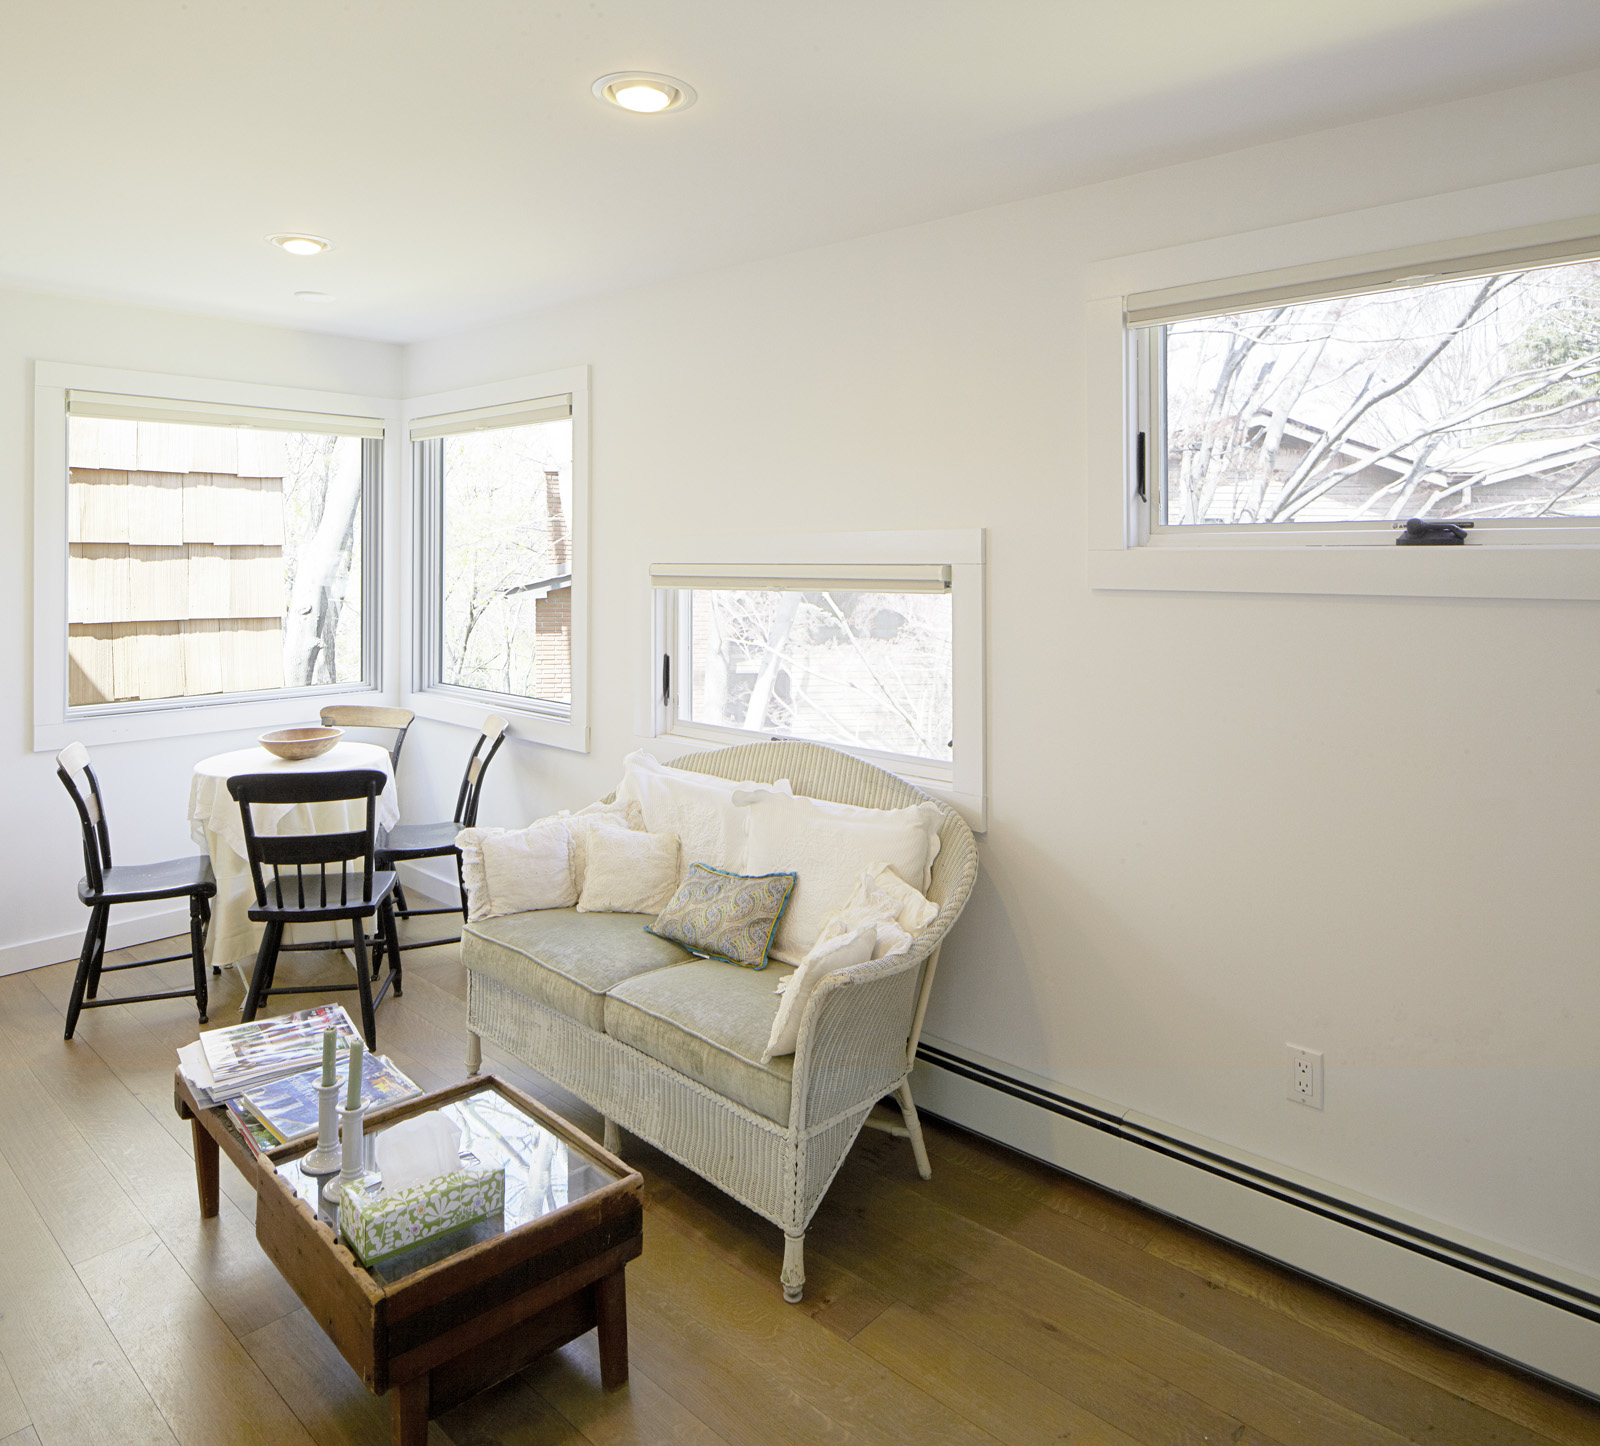 Variations in the guest suite windows allow for privacy at one end and a sitting